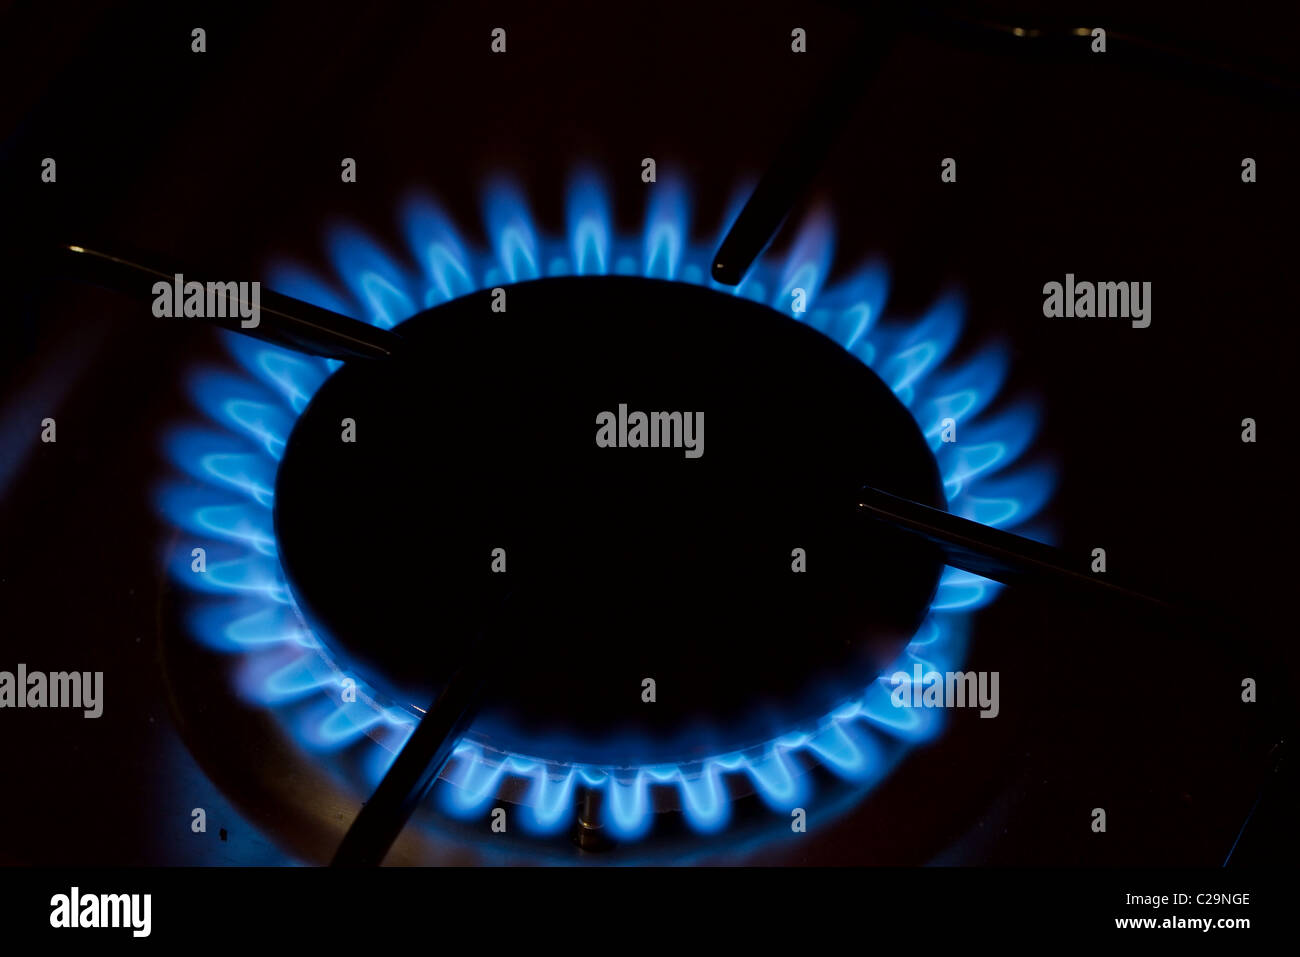 Flame of the gas burner of a stove Stock Photo